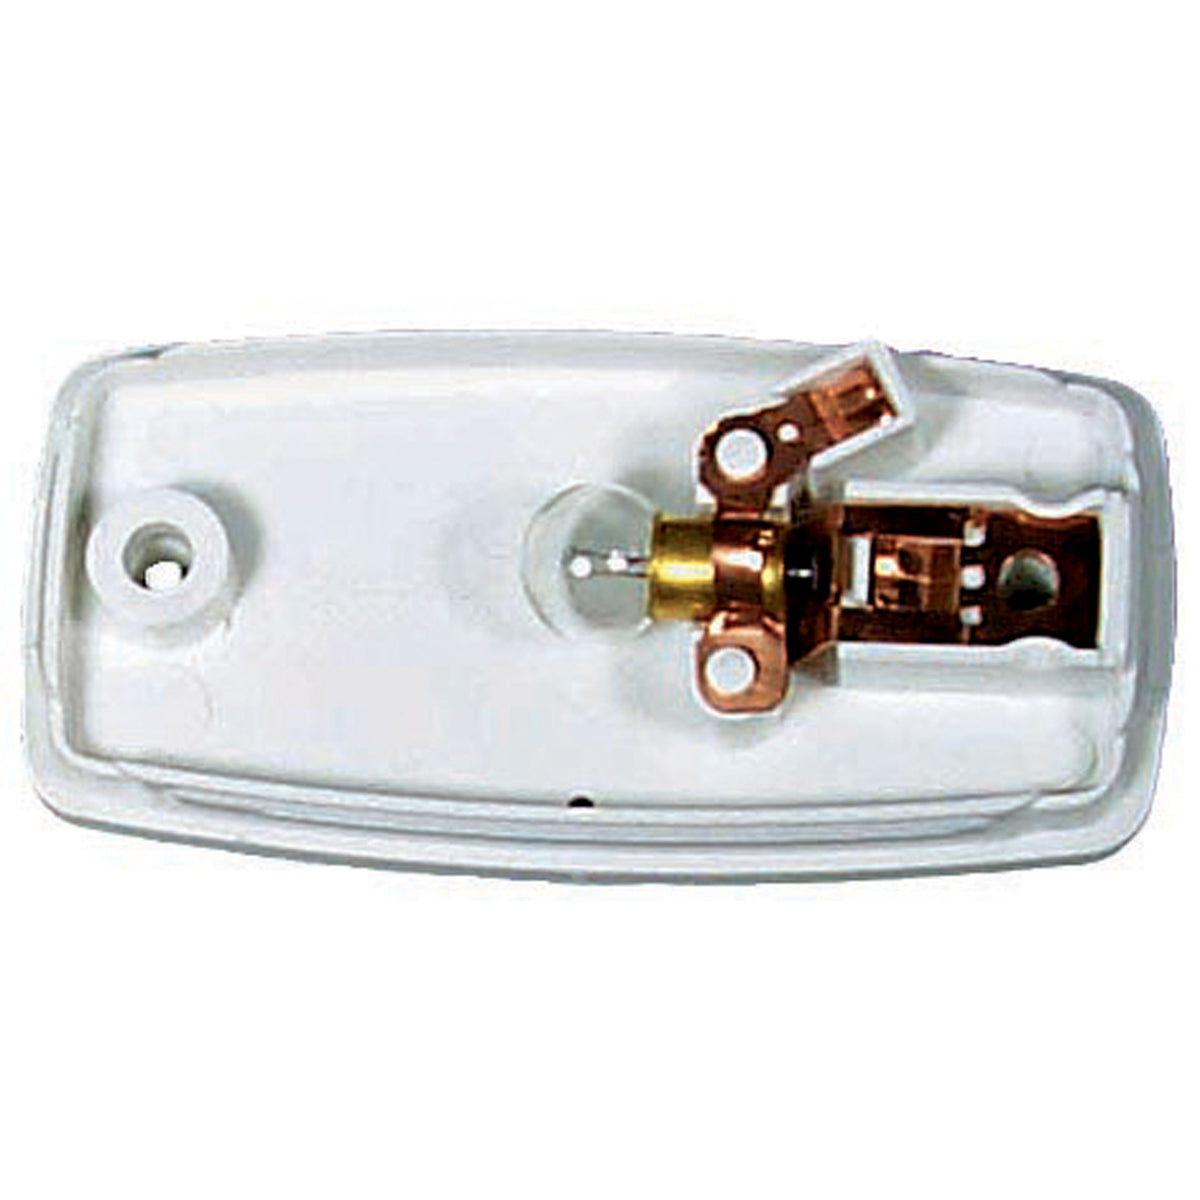 Bargman B349-0300 The 349 Series Clearance Light - Base Only